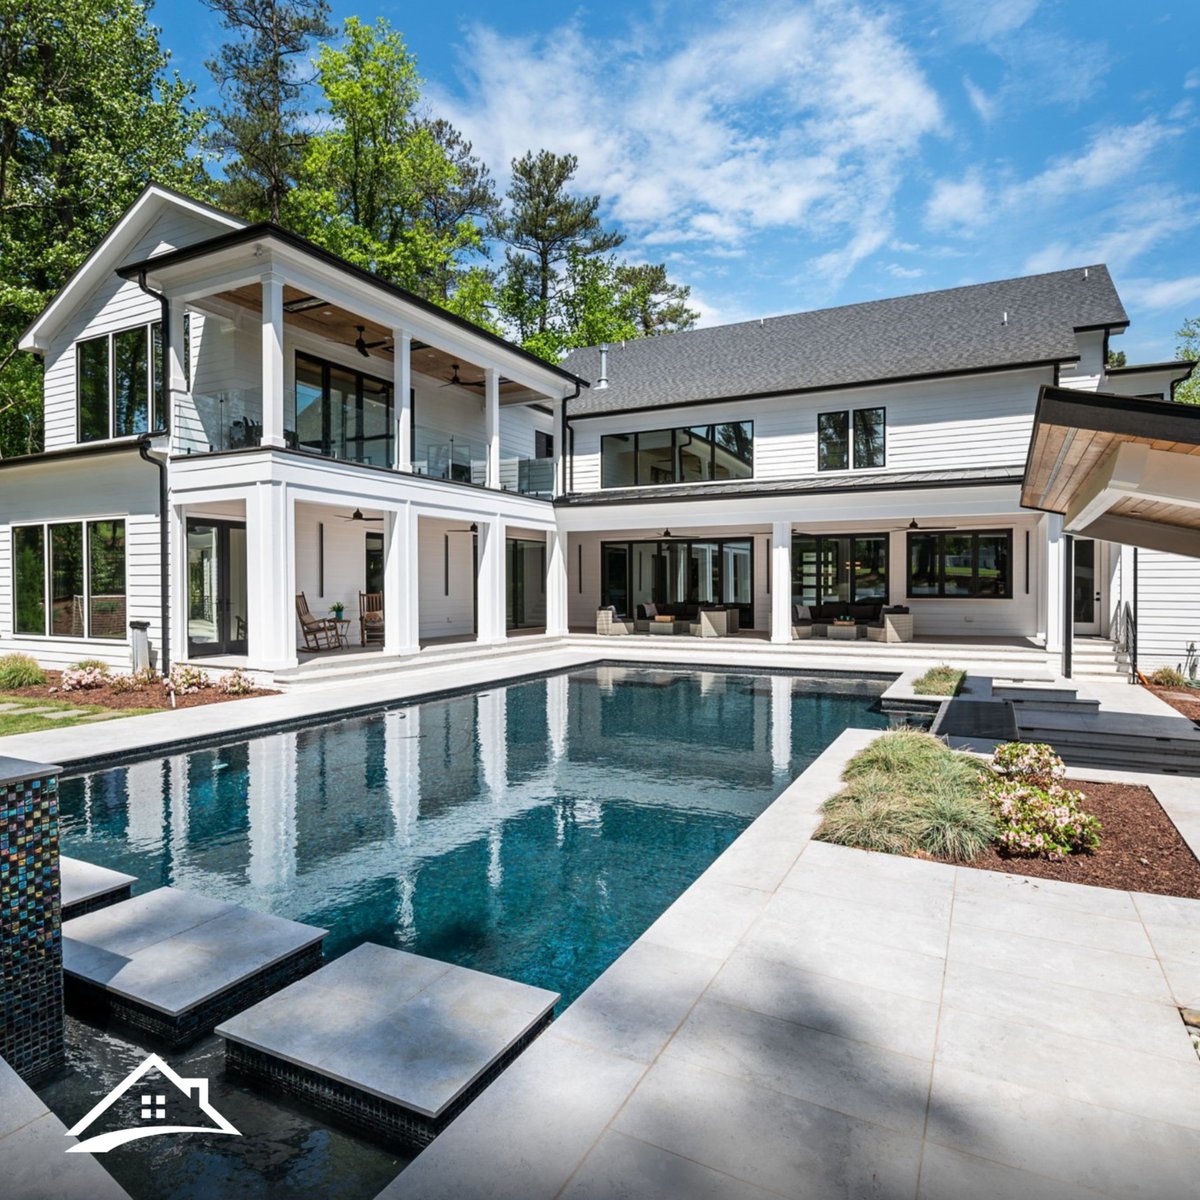 Luxurious home features backyard sanctuary overlooking the North Ridge Golf Course! ⛳ 📍 1616 Hunting Ridge Road, Raleigh, NC 27615 🎯 $5,110,000 6 bed | 6 full bath | 2 half bath | 7,381 sq. ft. | 3-car garage ☎️ (919) 845-9909 🌐 bit.ly/3Uy4DnA #newlisting #raleigh